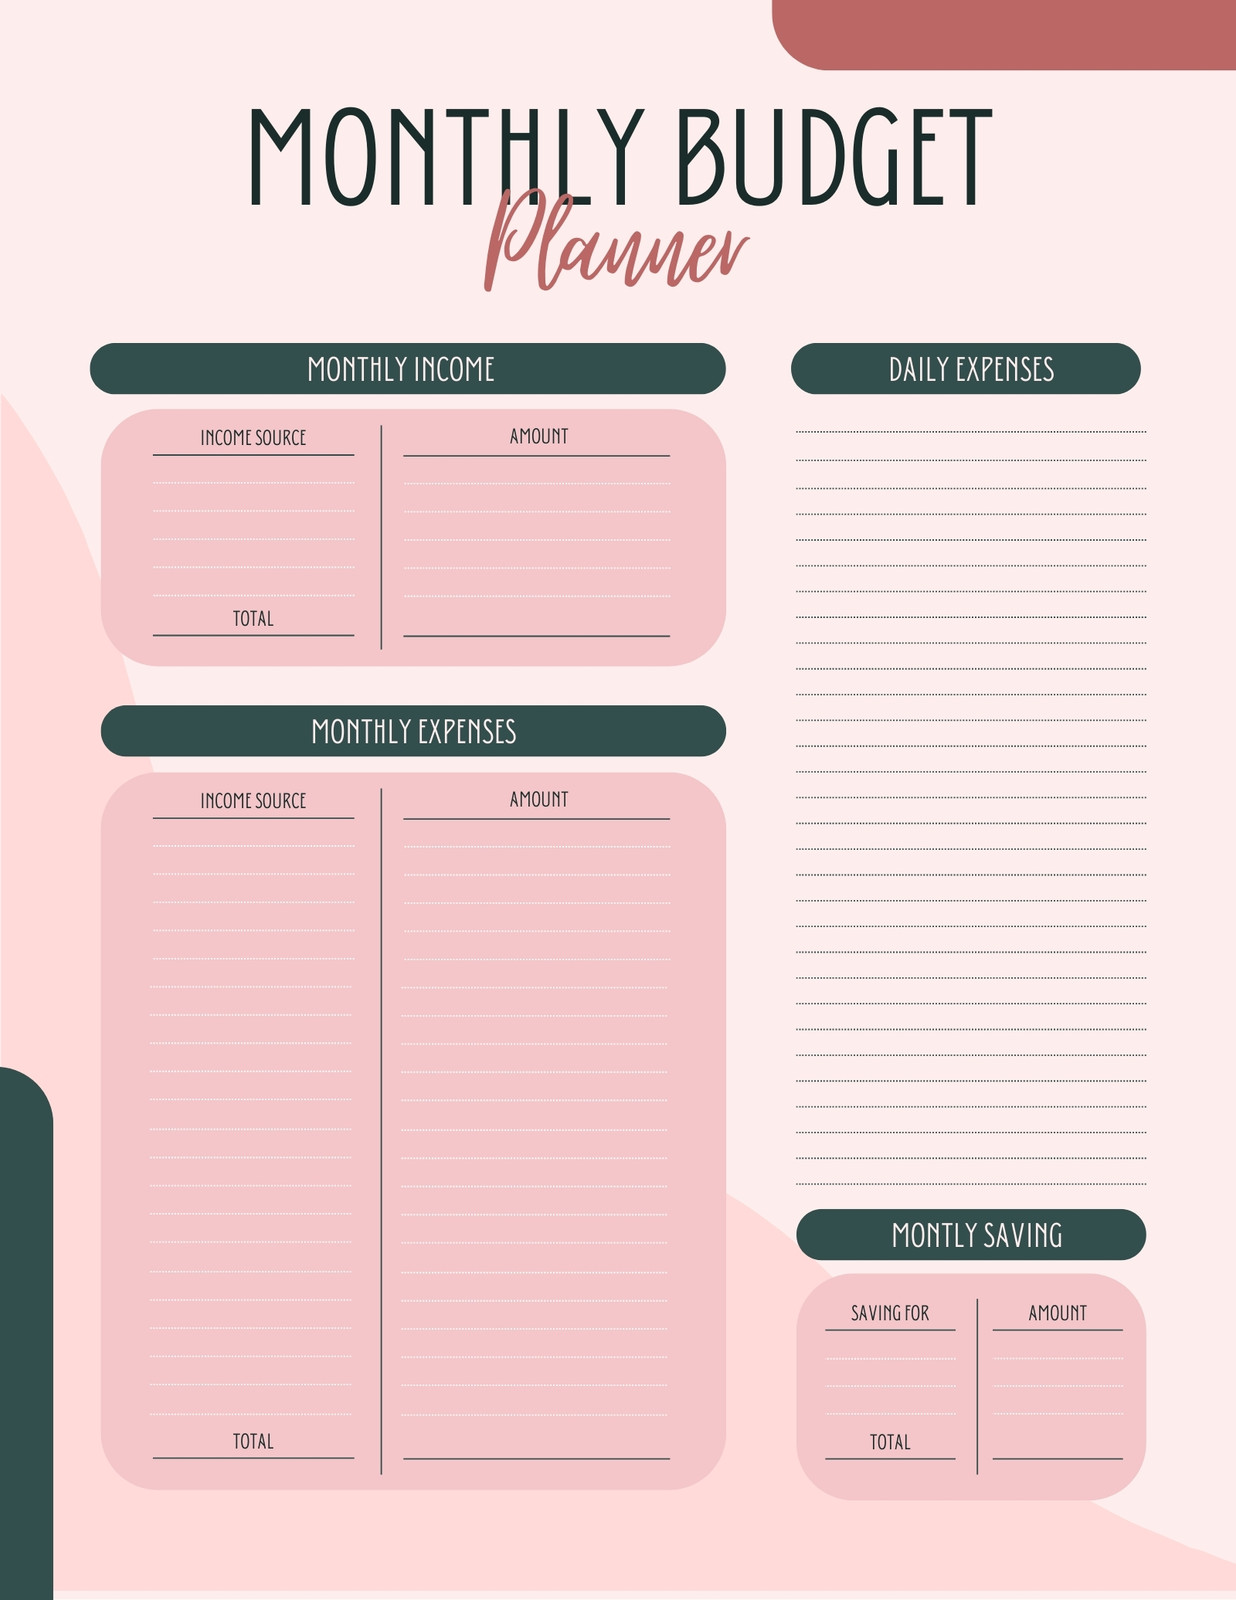 50/30/20 budget template, 50/30/20 rule, monthly budget template iPad, weekly paycheck budget planner, monthly budget overview digital download, Instant Download, A5，A4，Letter